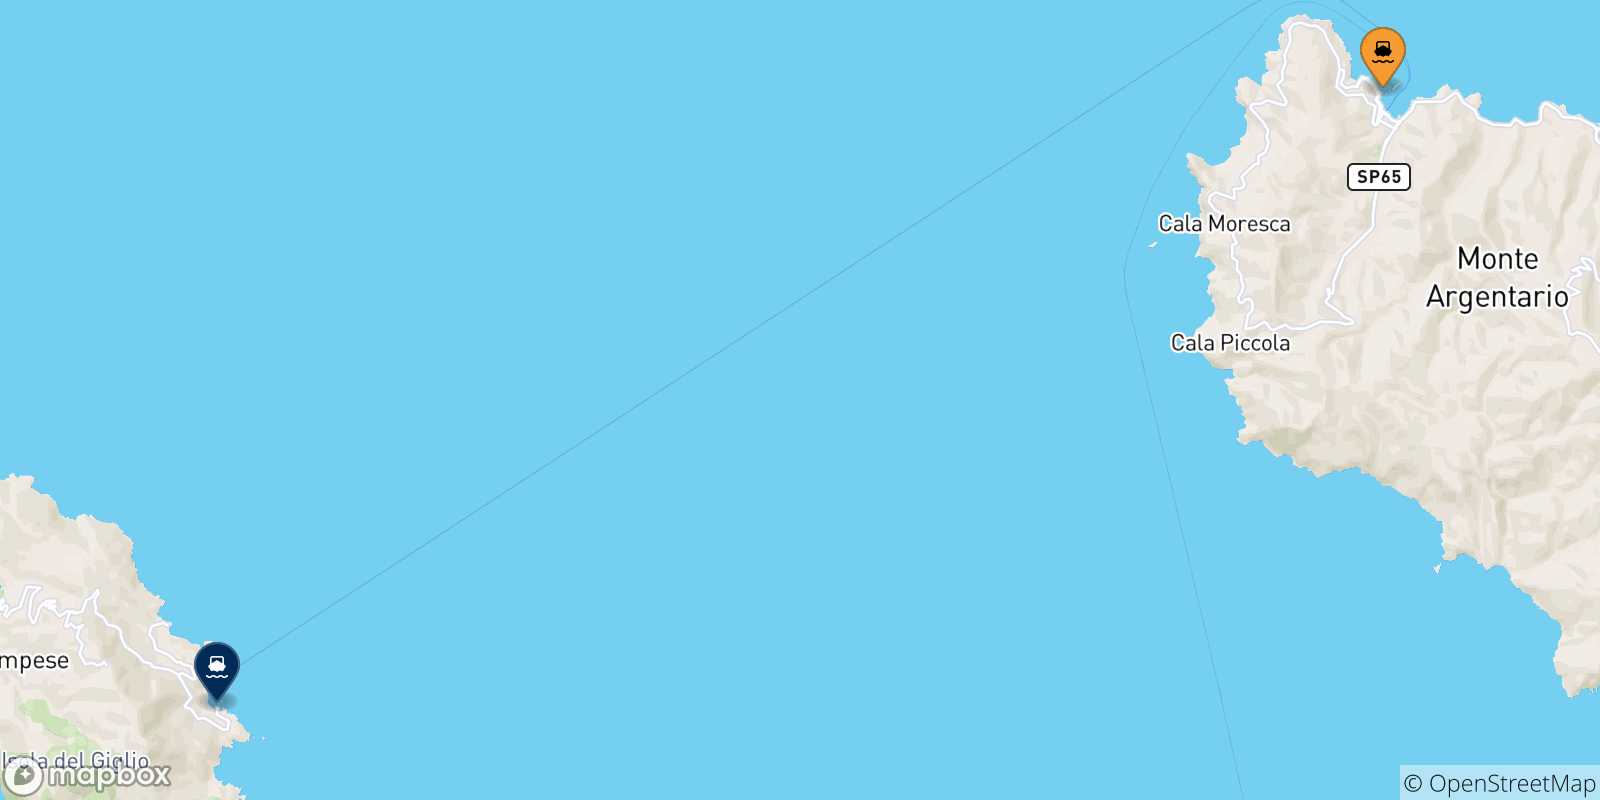 Map of the possible routes between Porto Santo Stefano and Giglio Island